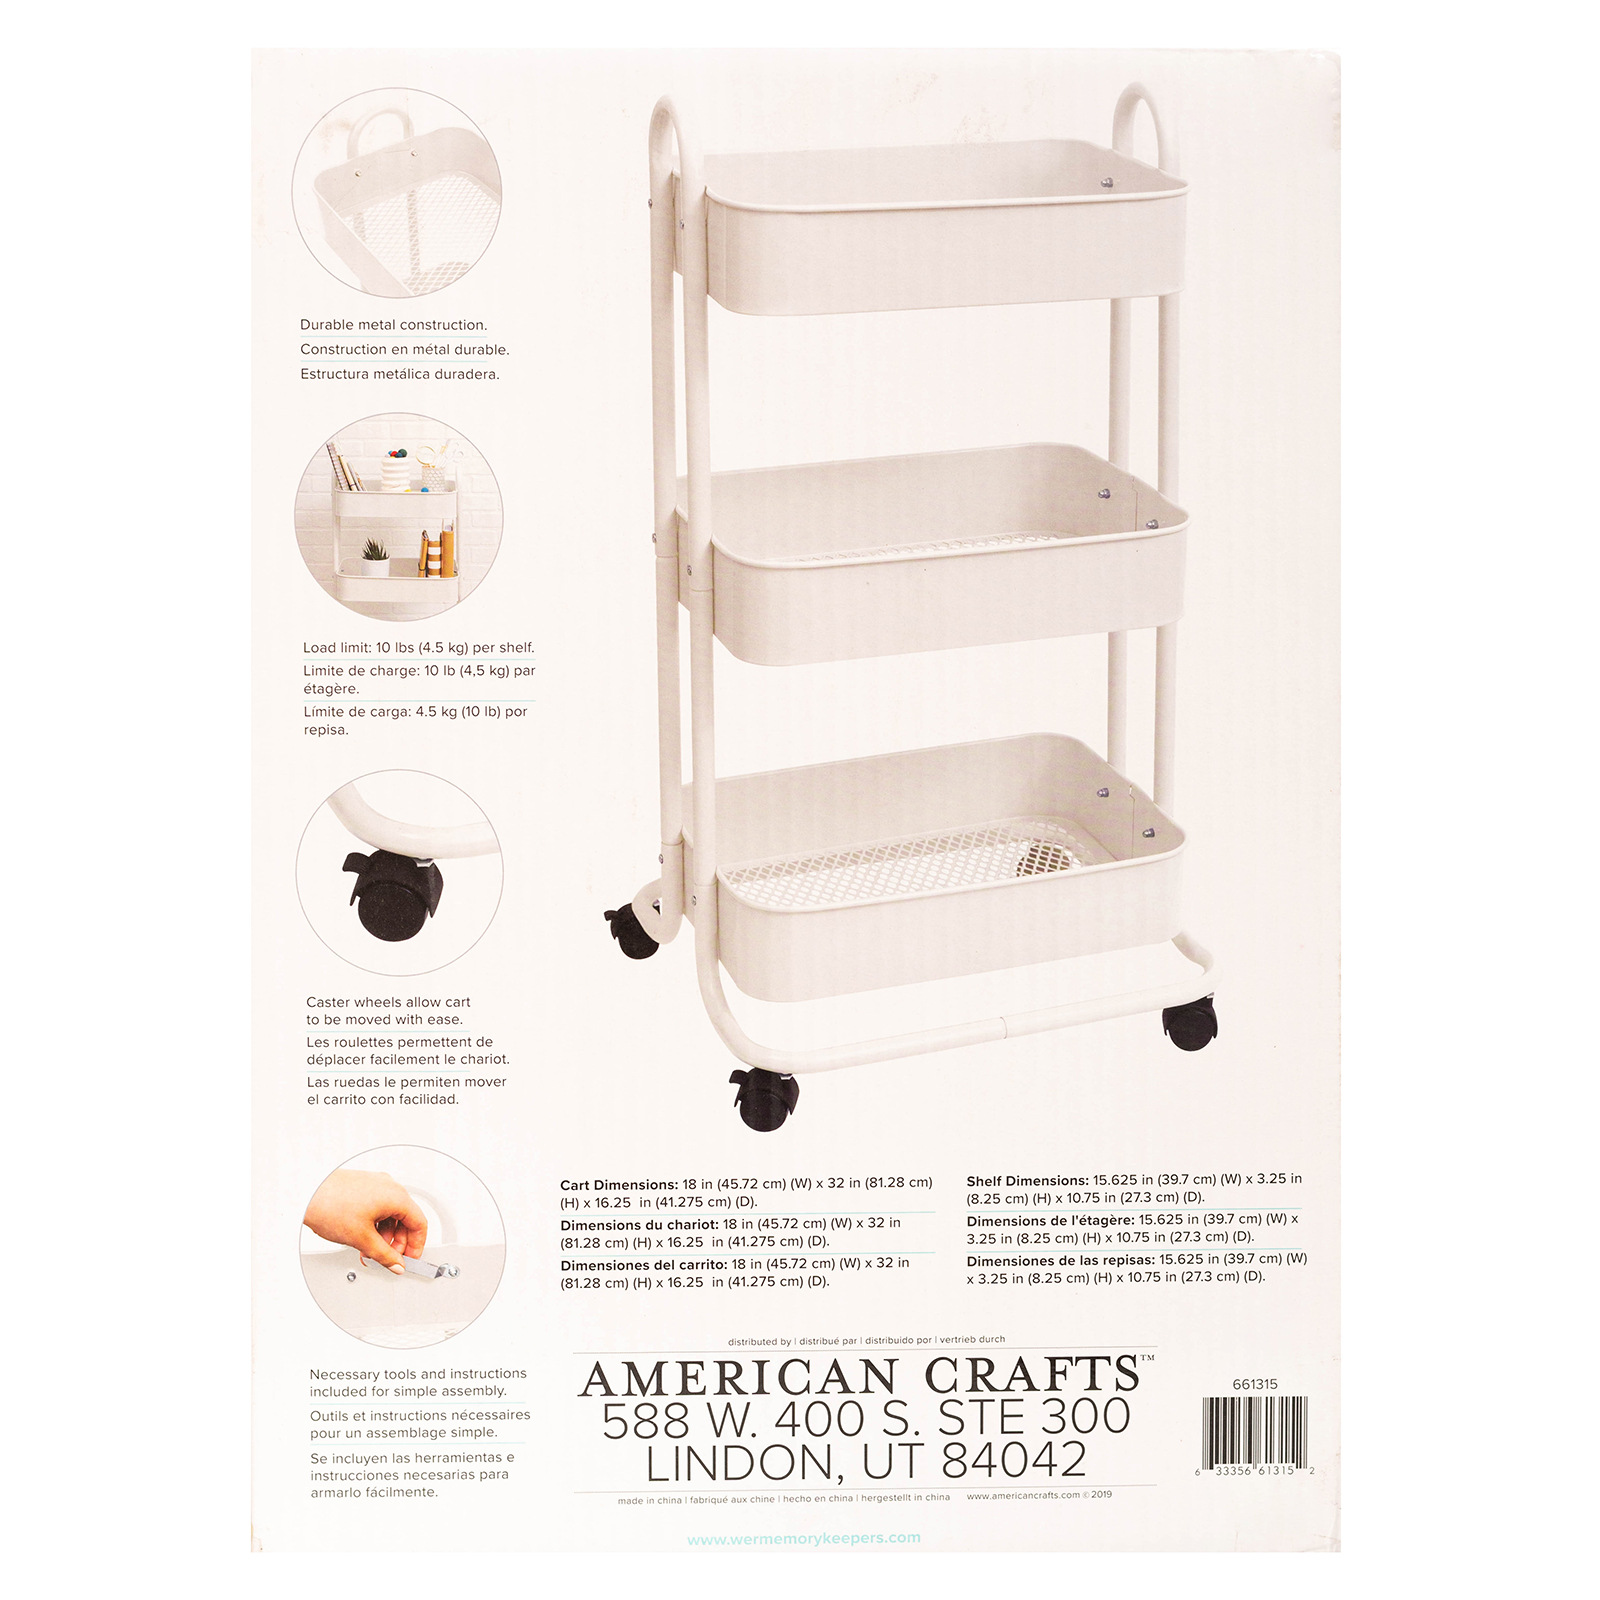 3-Tier Steel Rolling Storage Cart, 36 1/2" x 17" x 17", With Handles, Off White - image 4 of 4